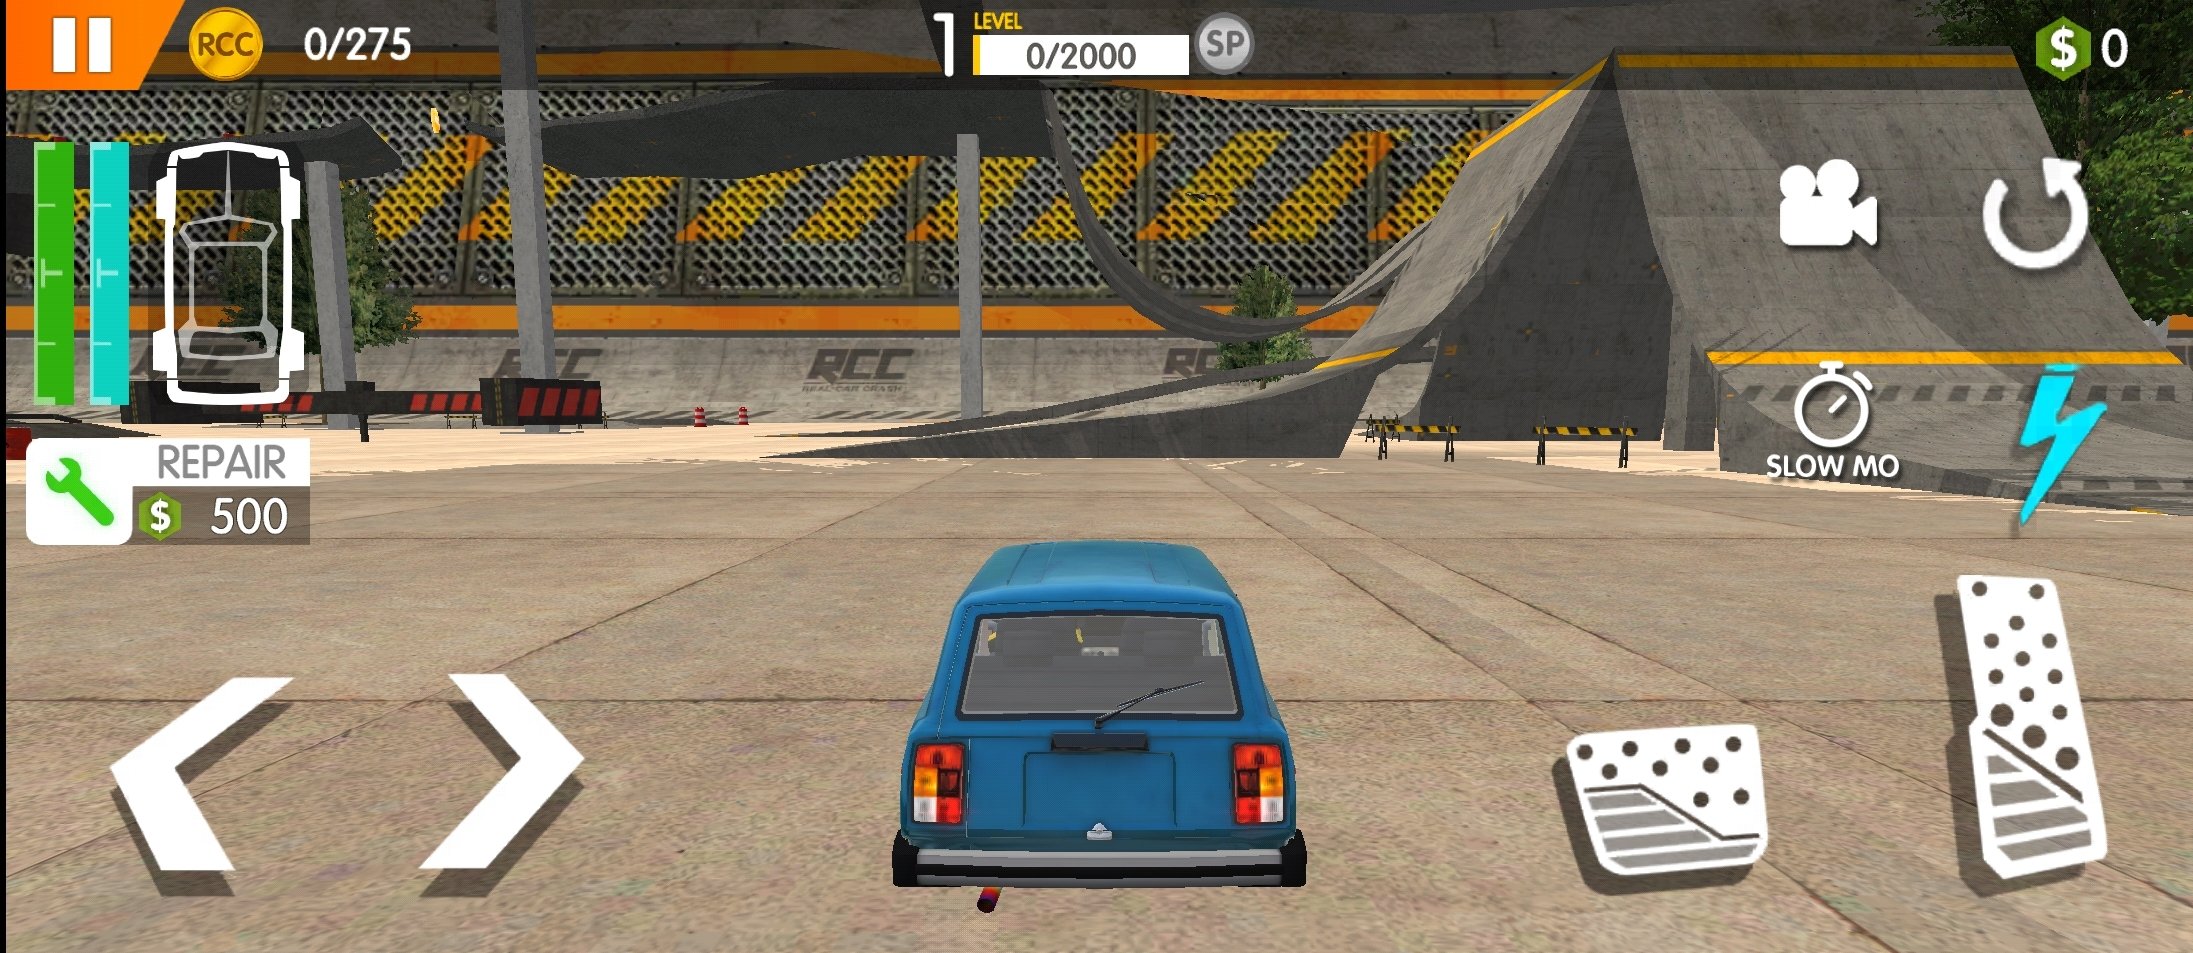 Play RCC - Real Car Crash Simulator Online for Free on PC & Mobile